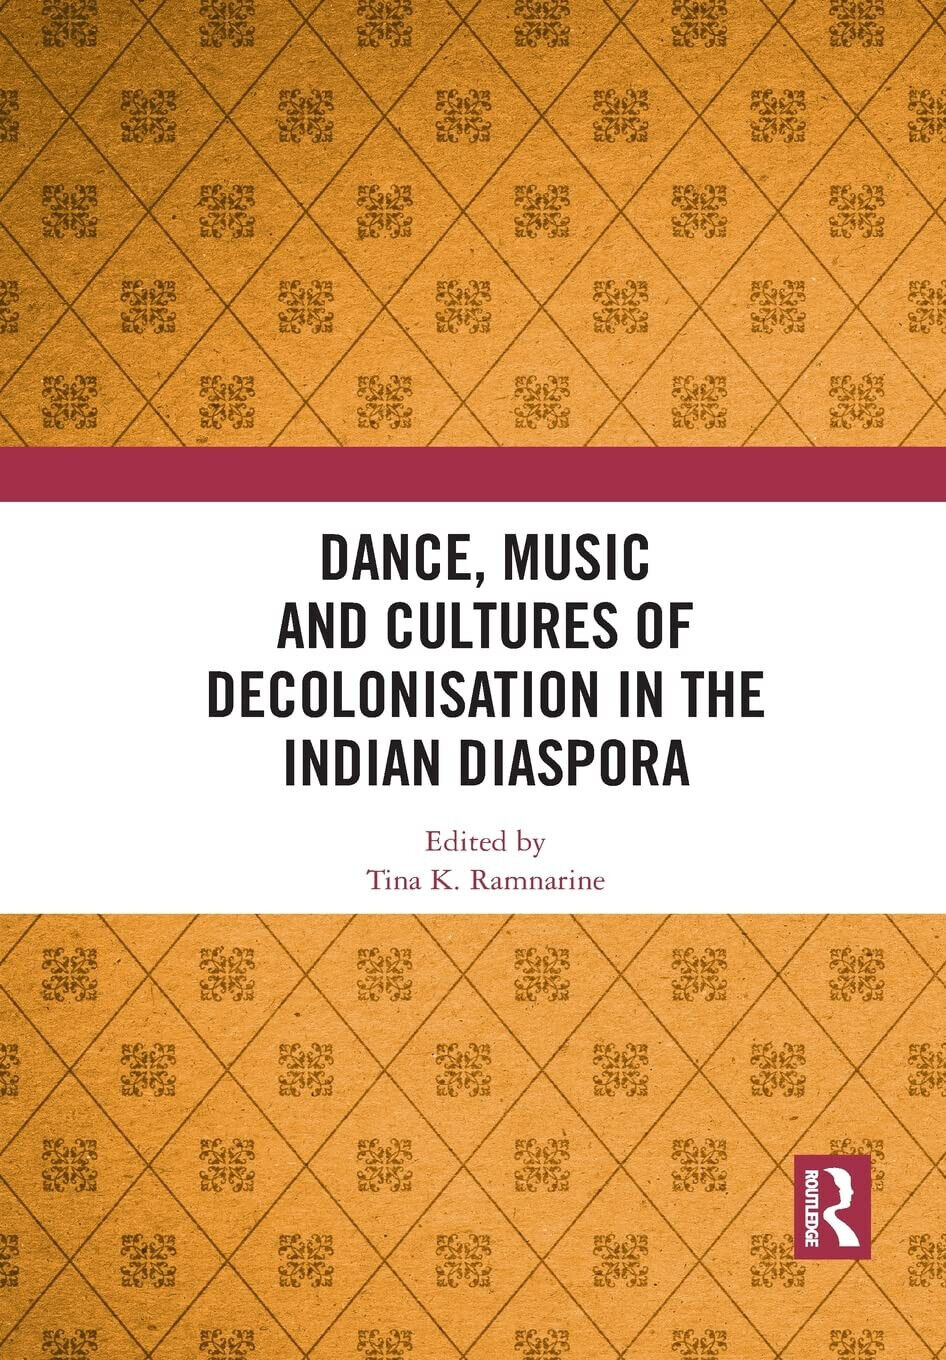 Dance, Music And Cultures Of Decolonisation In The Indian Diaspora - 2021